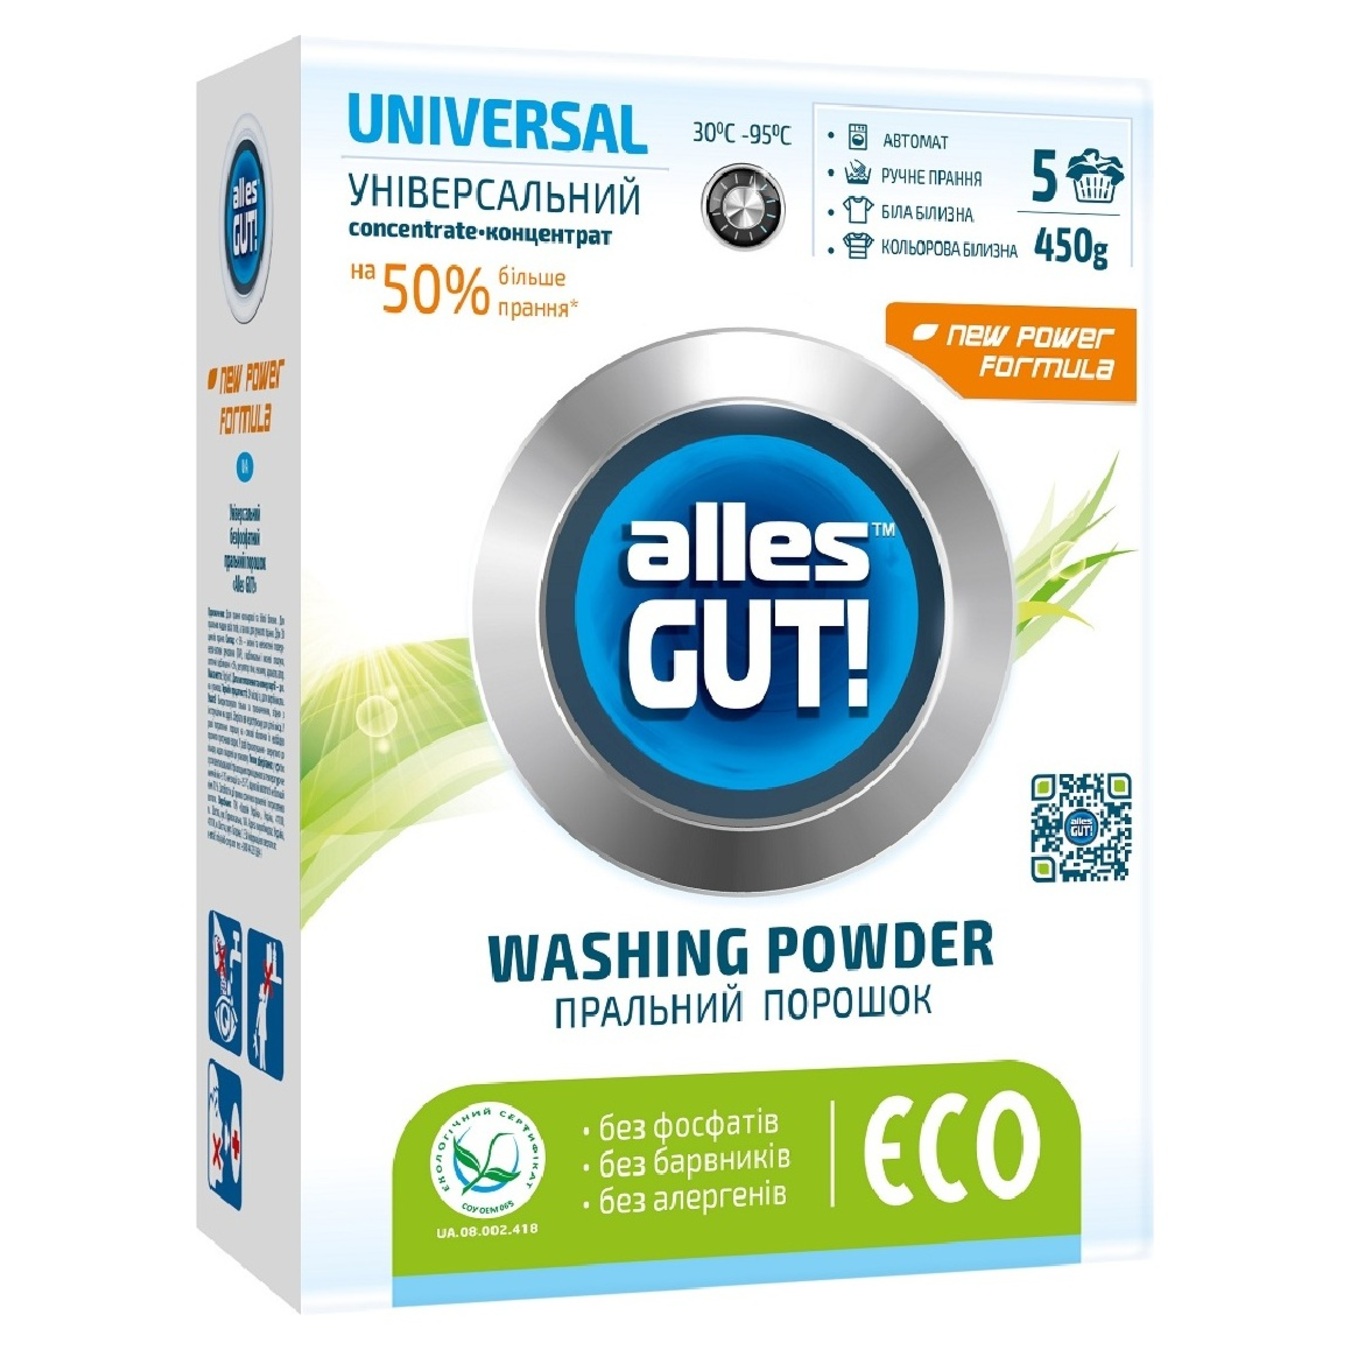 Alles Gut powder! Eco for washing universal 450g